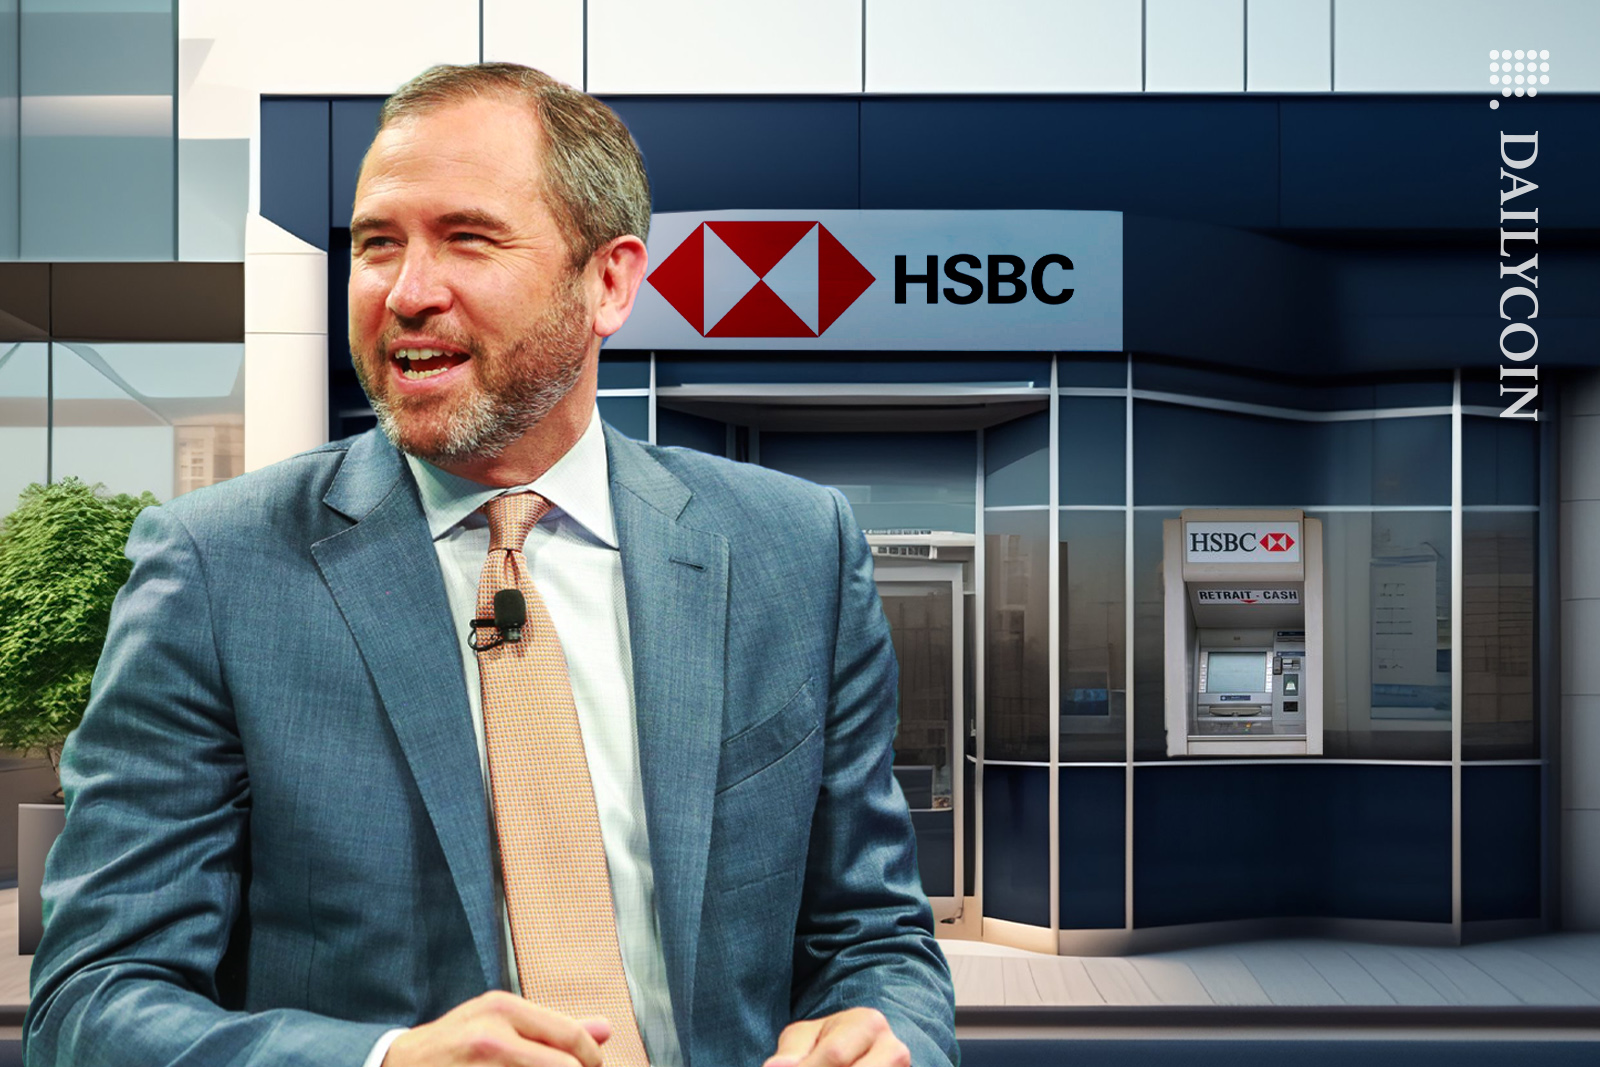 Brad Garlinghouse thrilled about the news about HSBC bank and Ripple.